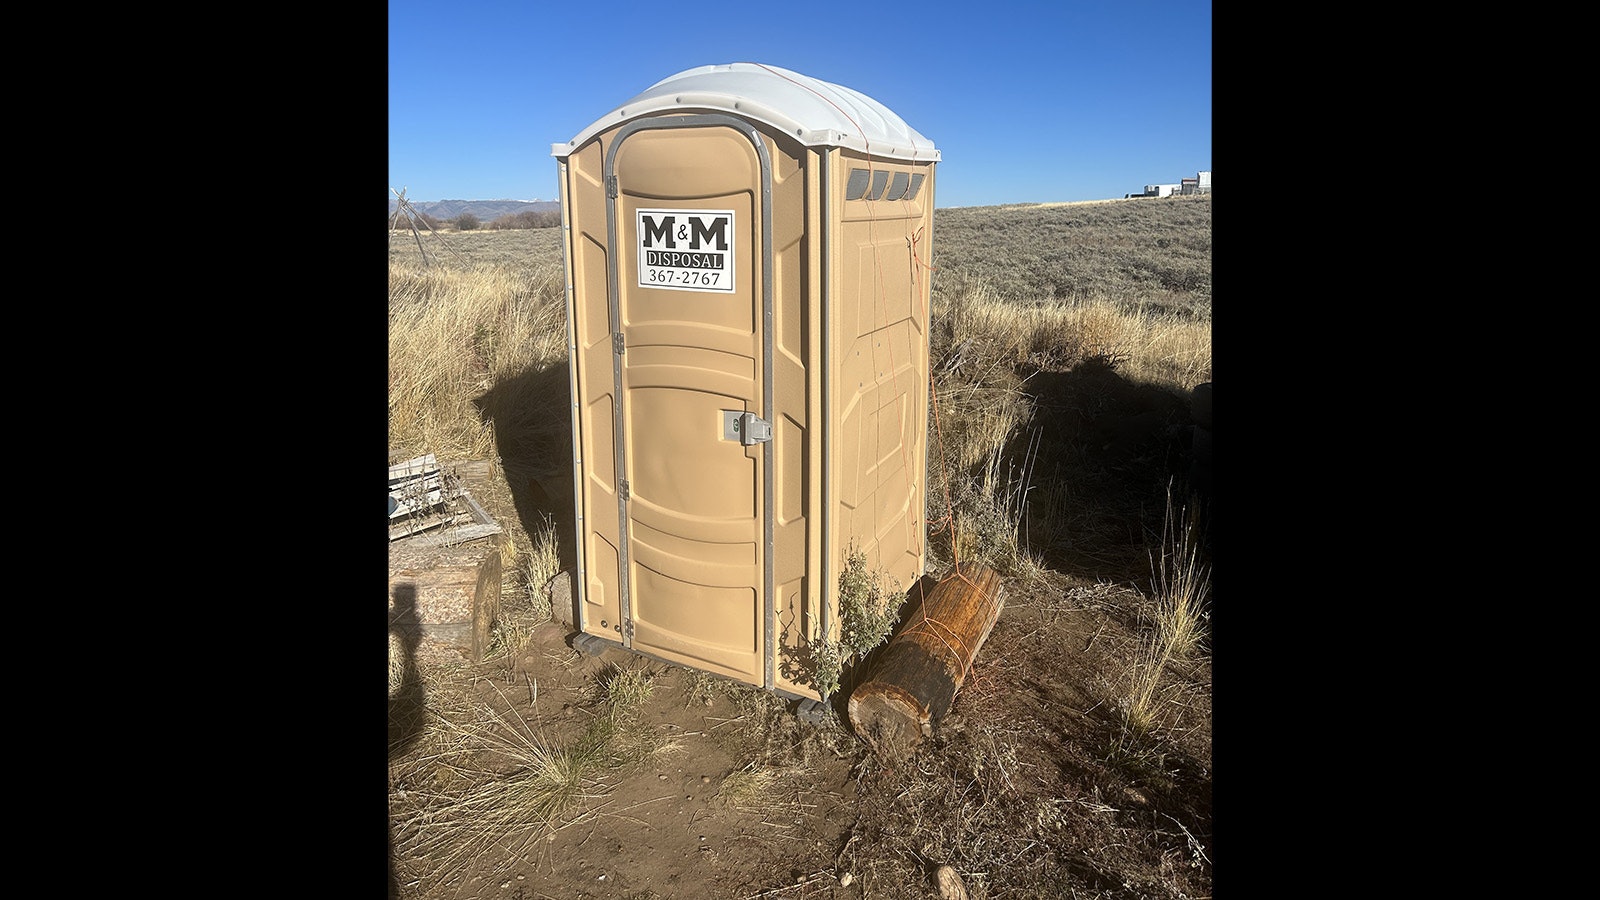 Septic systems are an expensive option that some homesteaders chose to forego during the initial building stage. Portable outhouses are an option as are composting toilets.